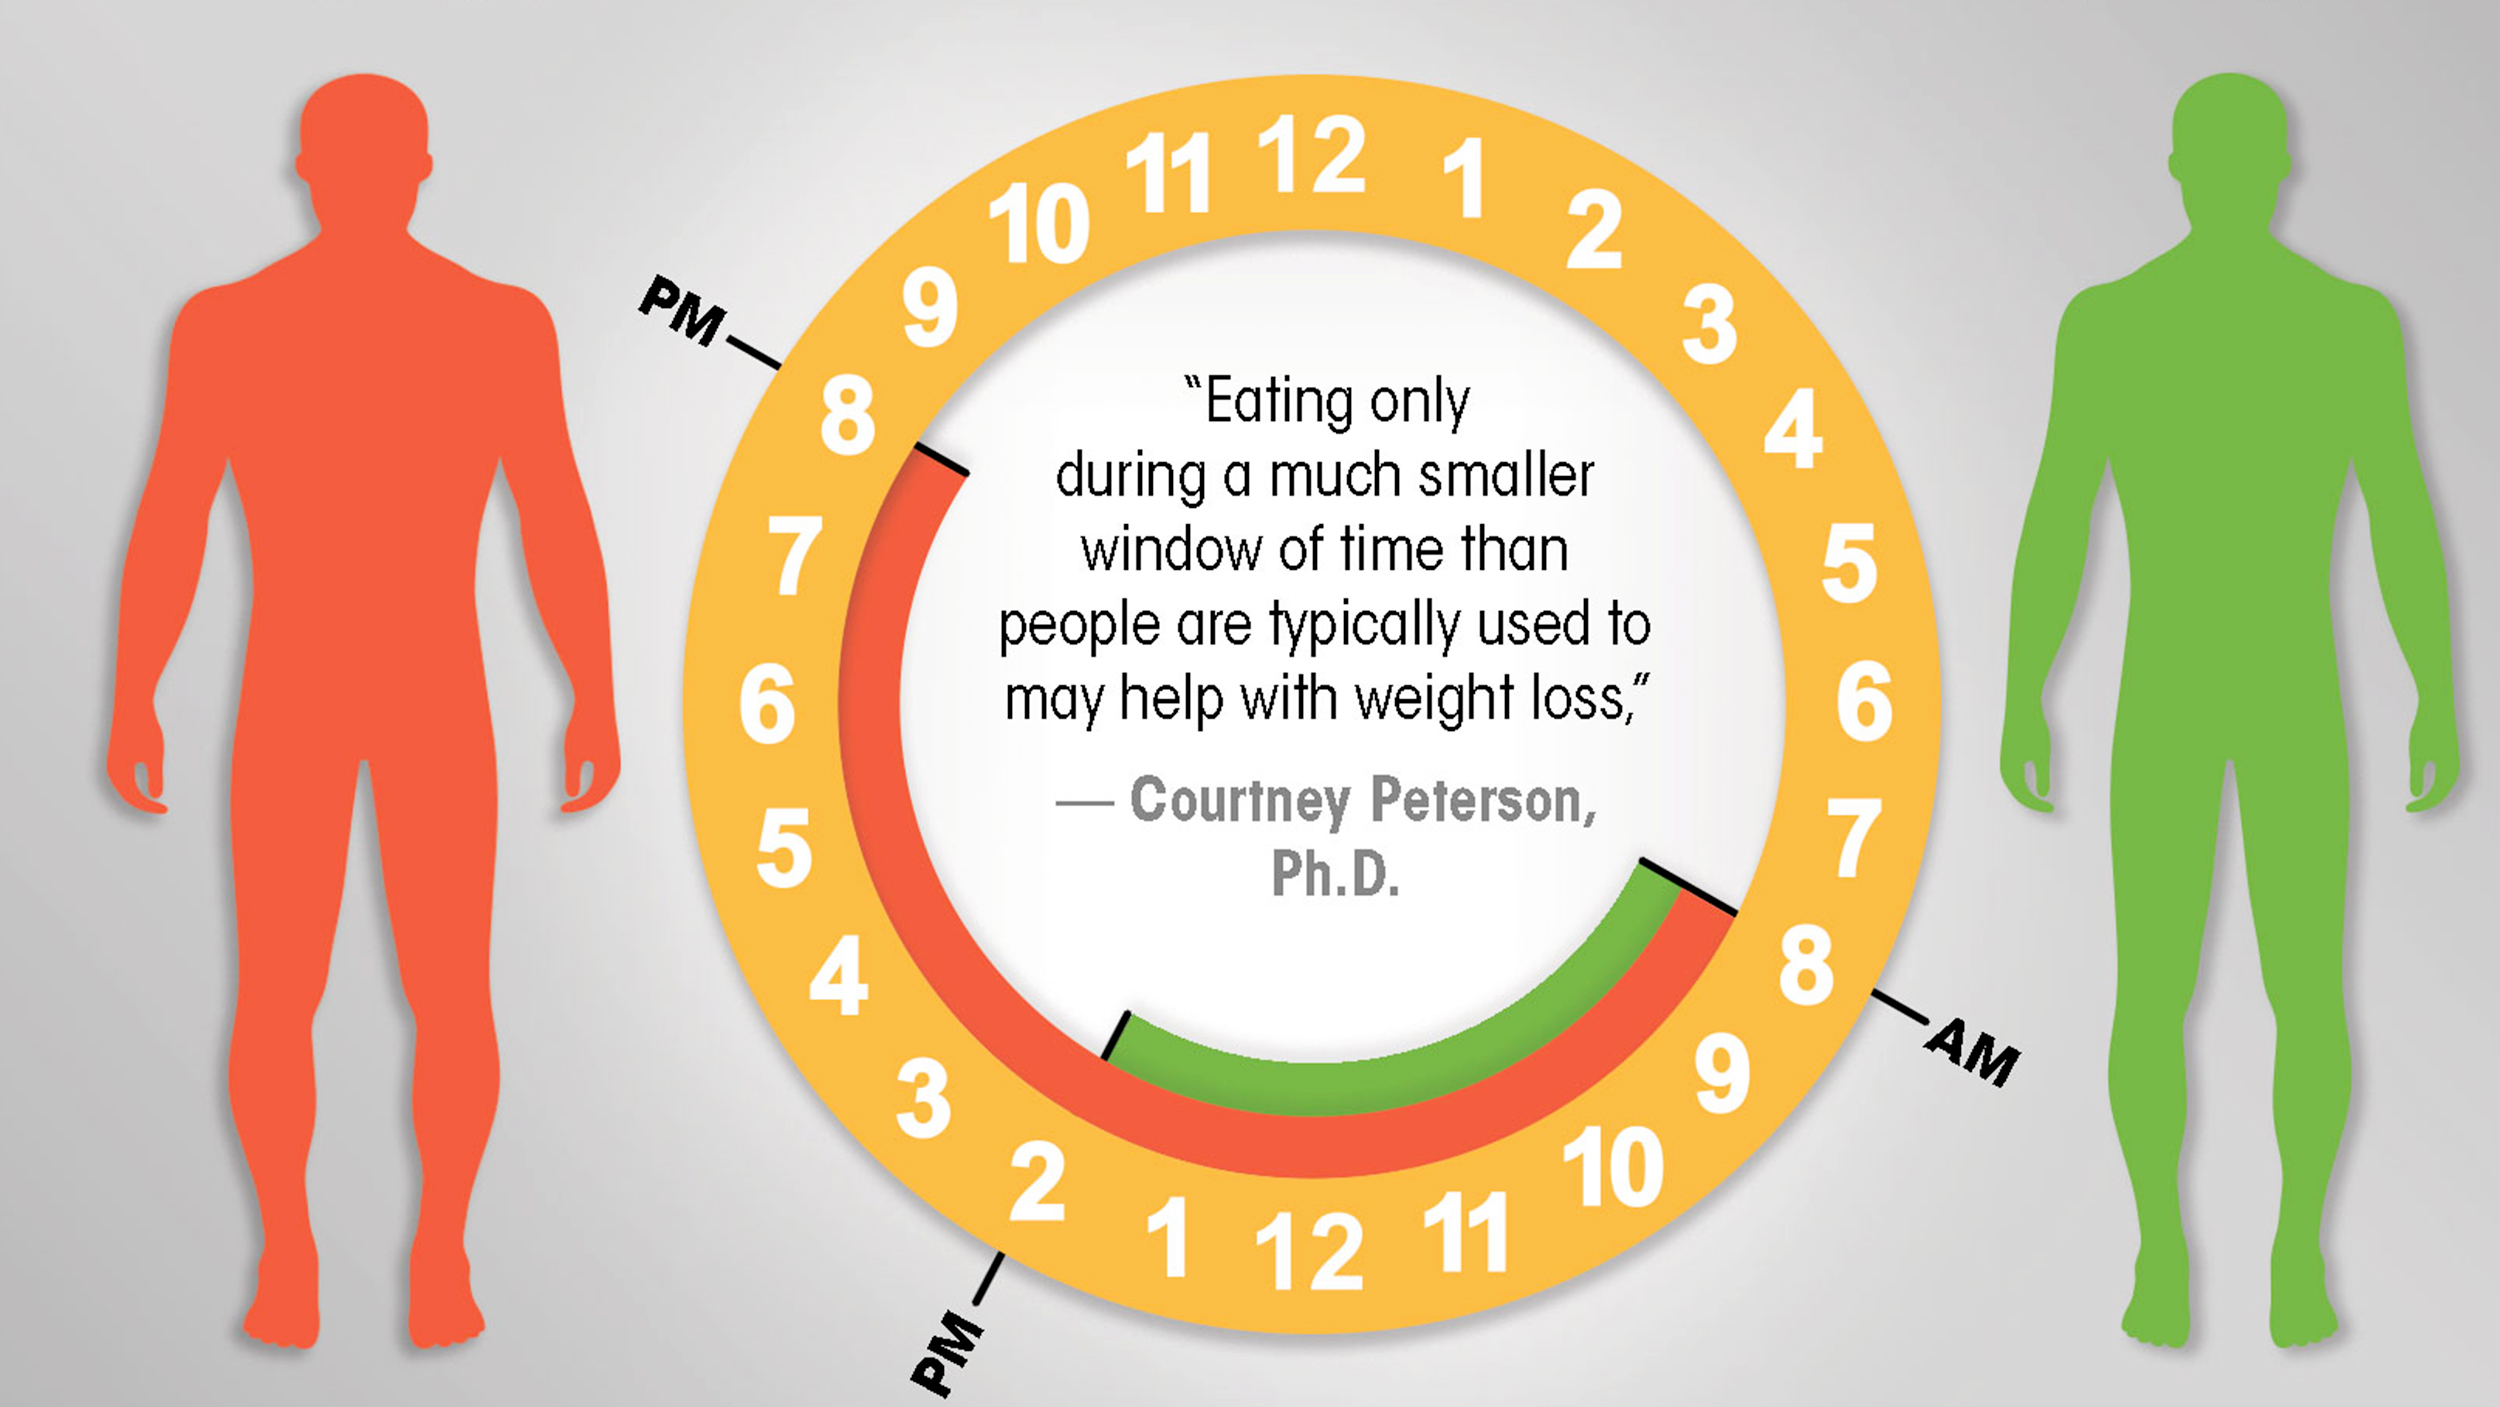 Timing of meals may be a factor in losing weight